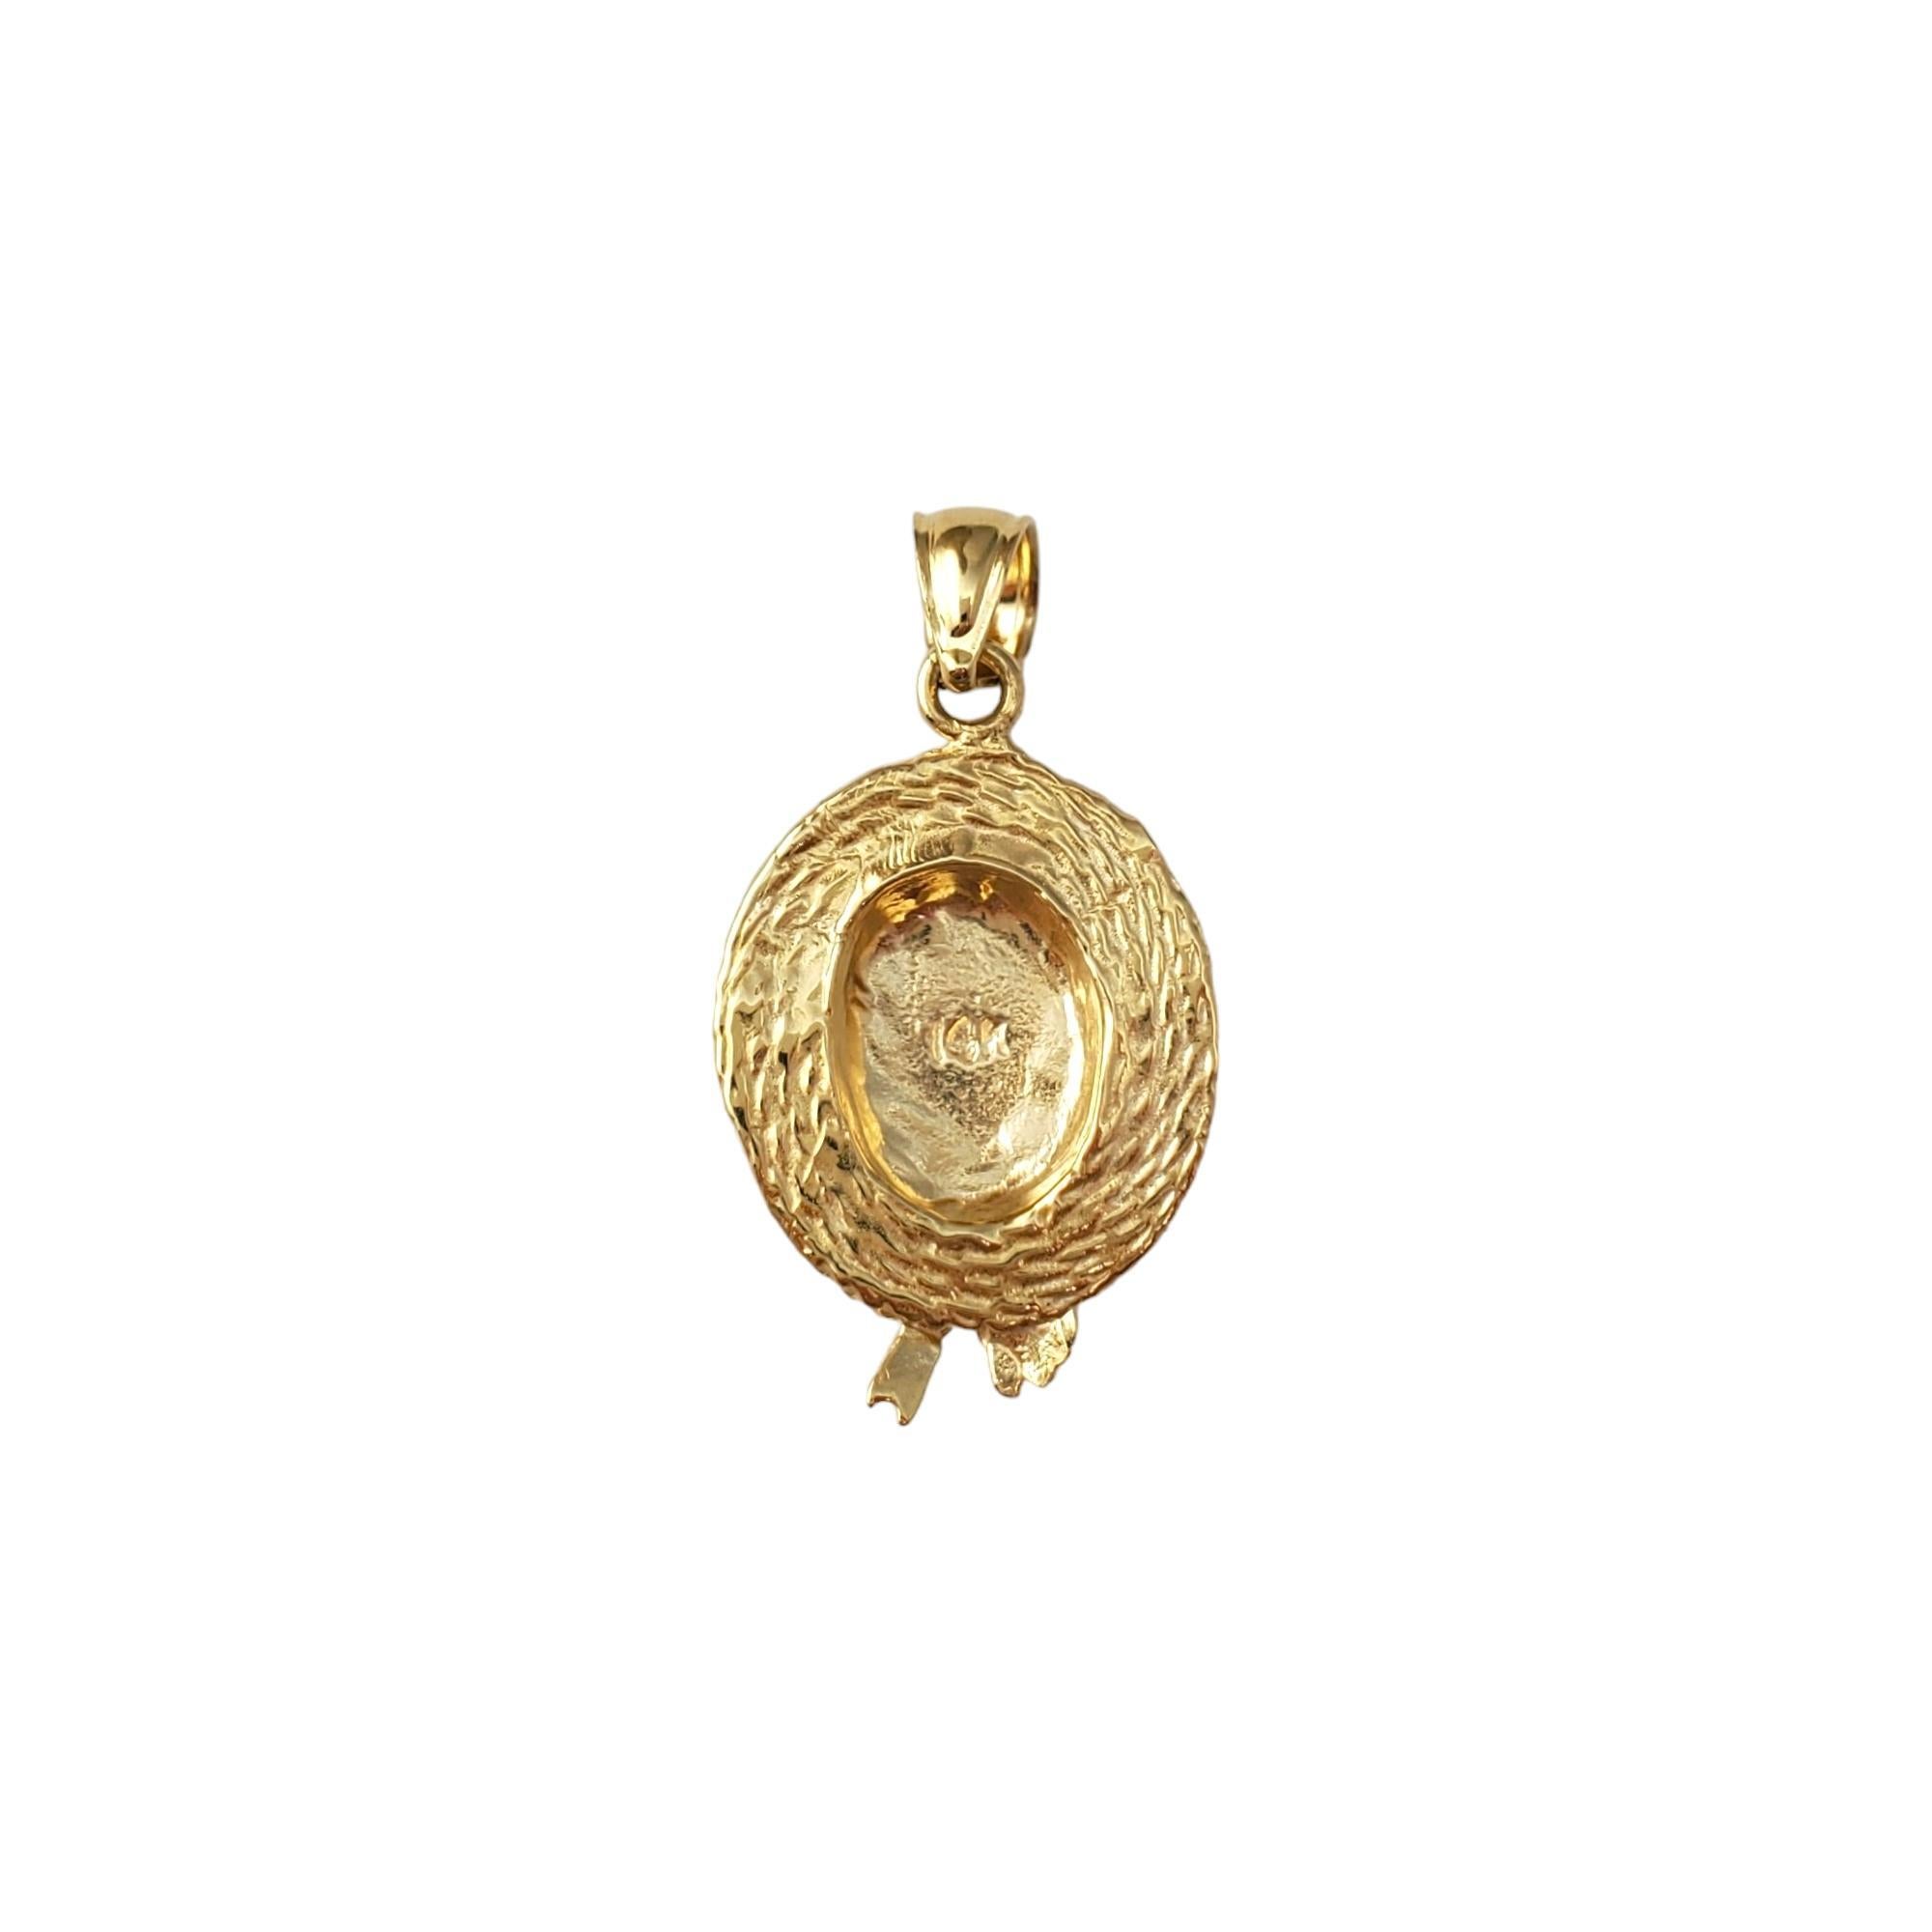 Vintage 14K Yellow Gold Hat Charm-

Elevate your style with this exquisite hat charm! 

Size:  21.6 mm  x  14.5 mm X 4.0mm 

Weight:  1.6 dwt./  2.5 gr.

Stamped:  14K

Will come packaged in a gift box or pouch (when possible) and will be shipped